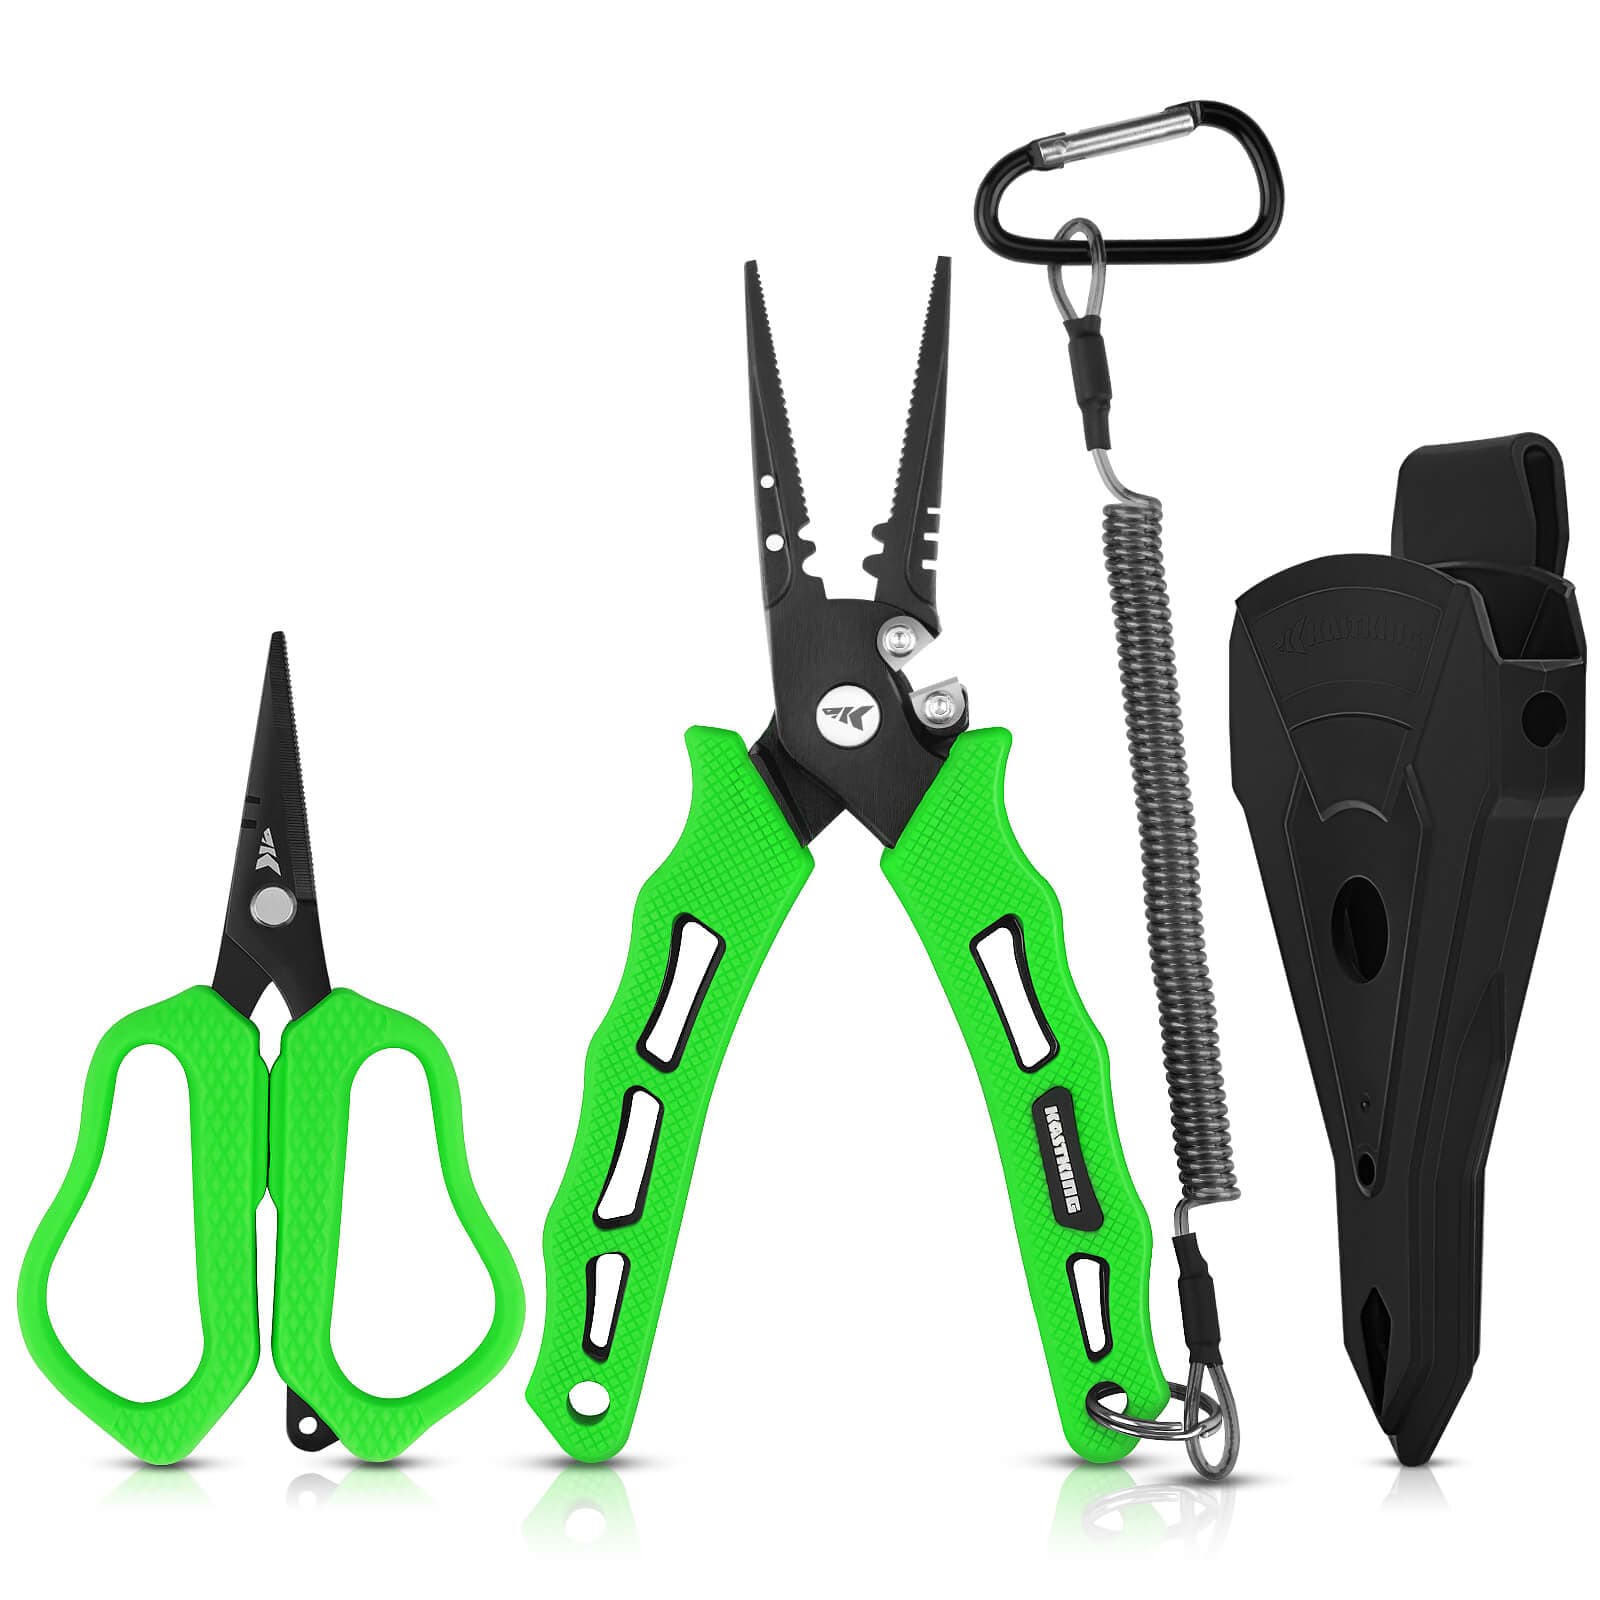 KastKing Cutthroat 7-inch Pliers & 5-inch Braid Scissors Combo - Green /  Straight Nose